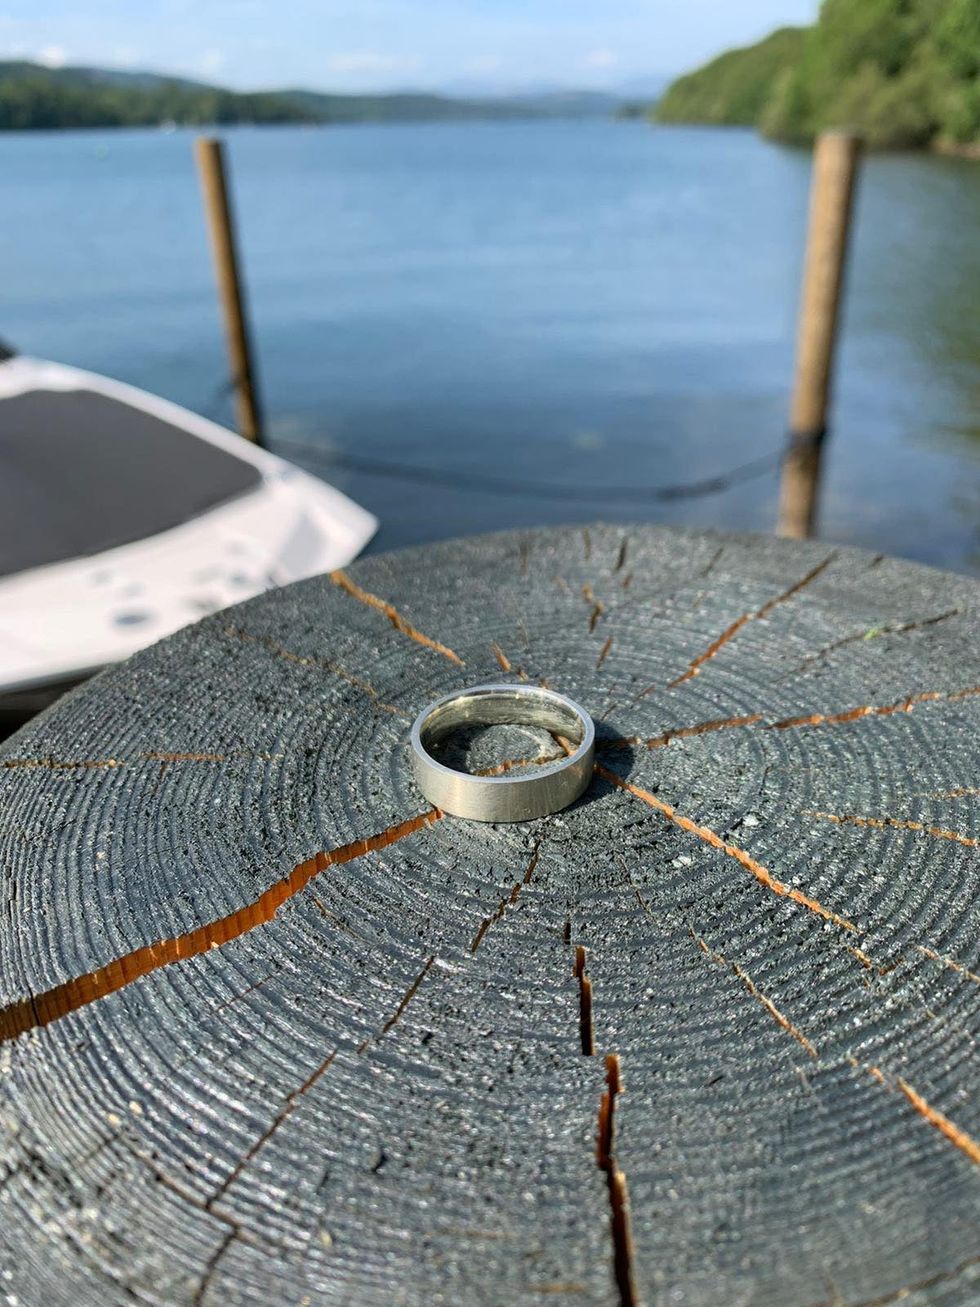 Mick Balchin\u2019s wedding ring after it was recovered from Lake Windermere (Annabelle Balchin)